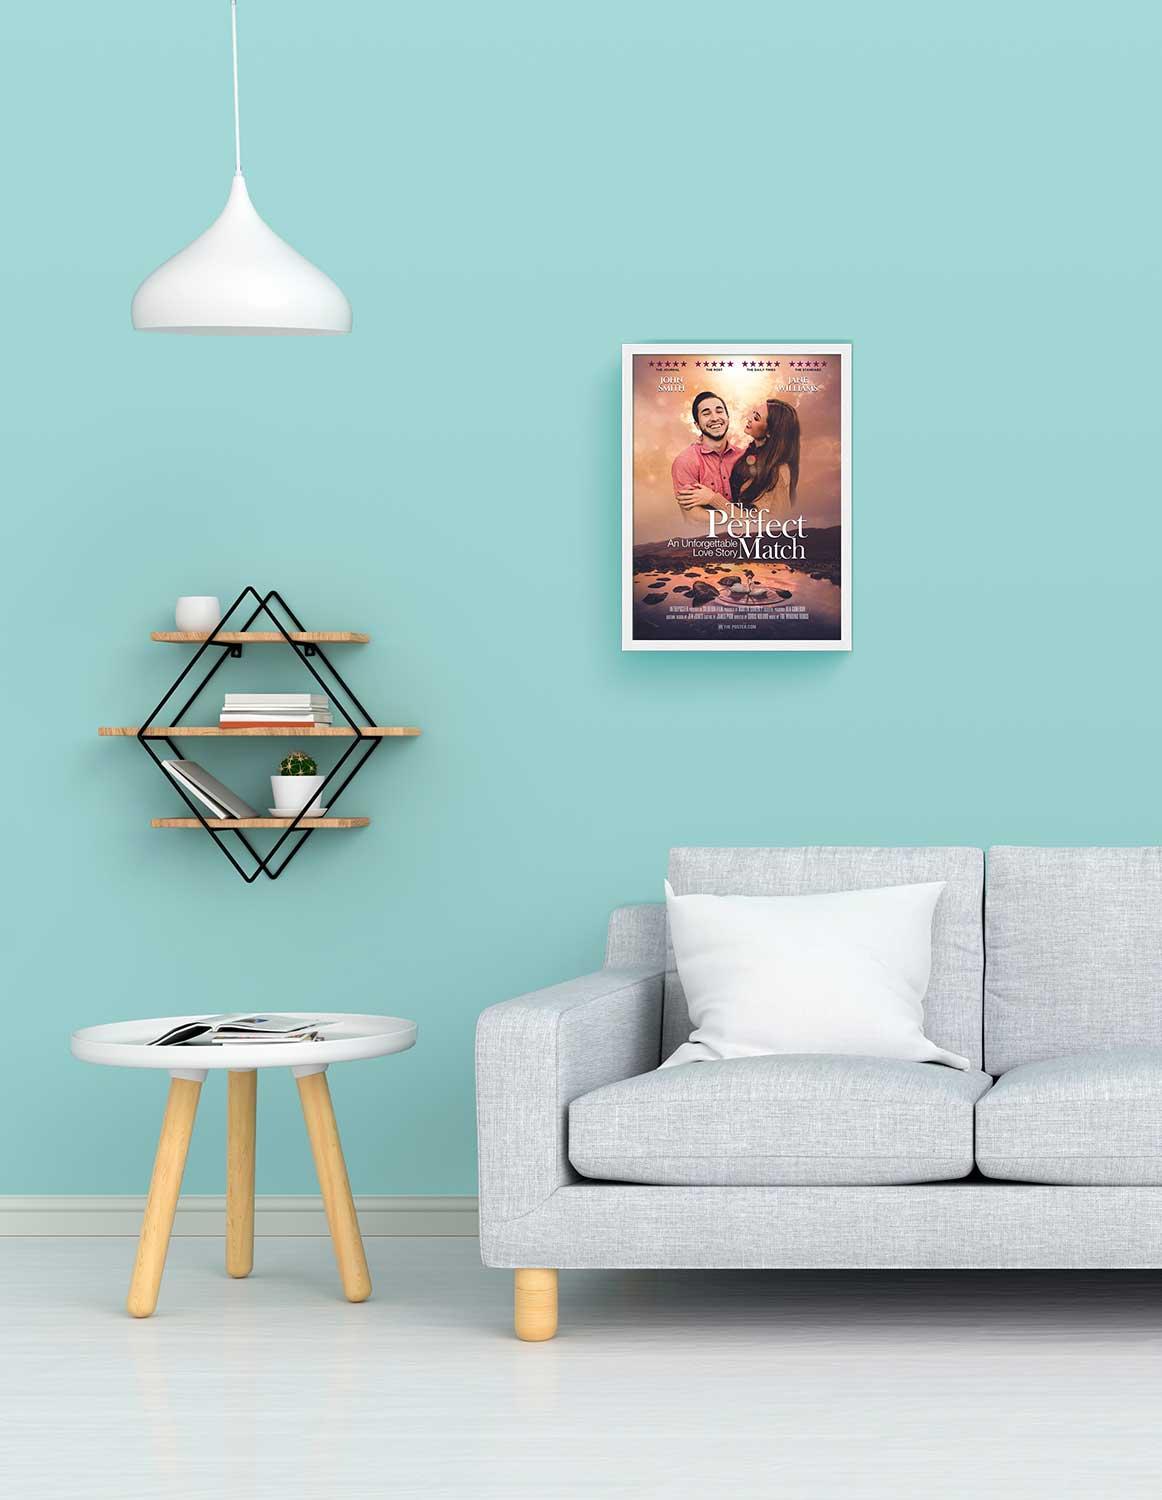 The perfect match romantic movie poster in a small white frame on a blue wall above a grey modern sofa